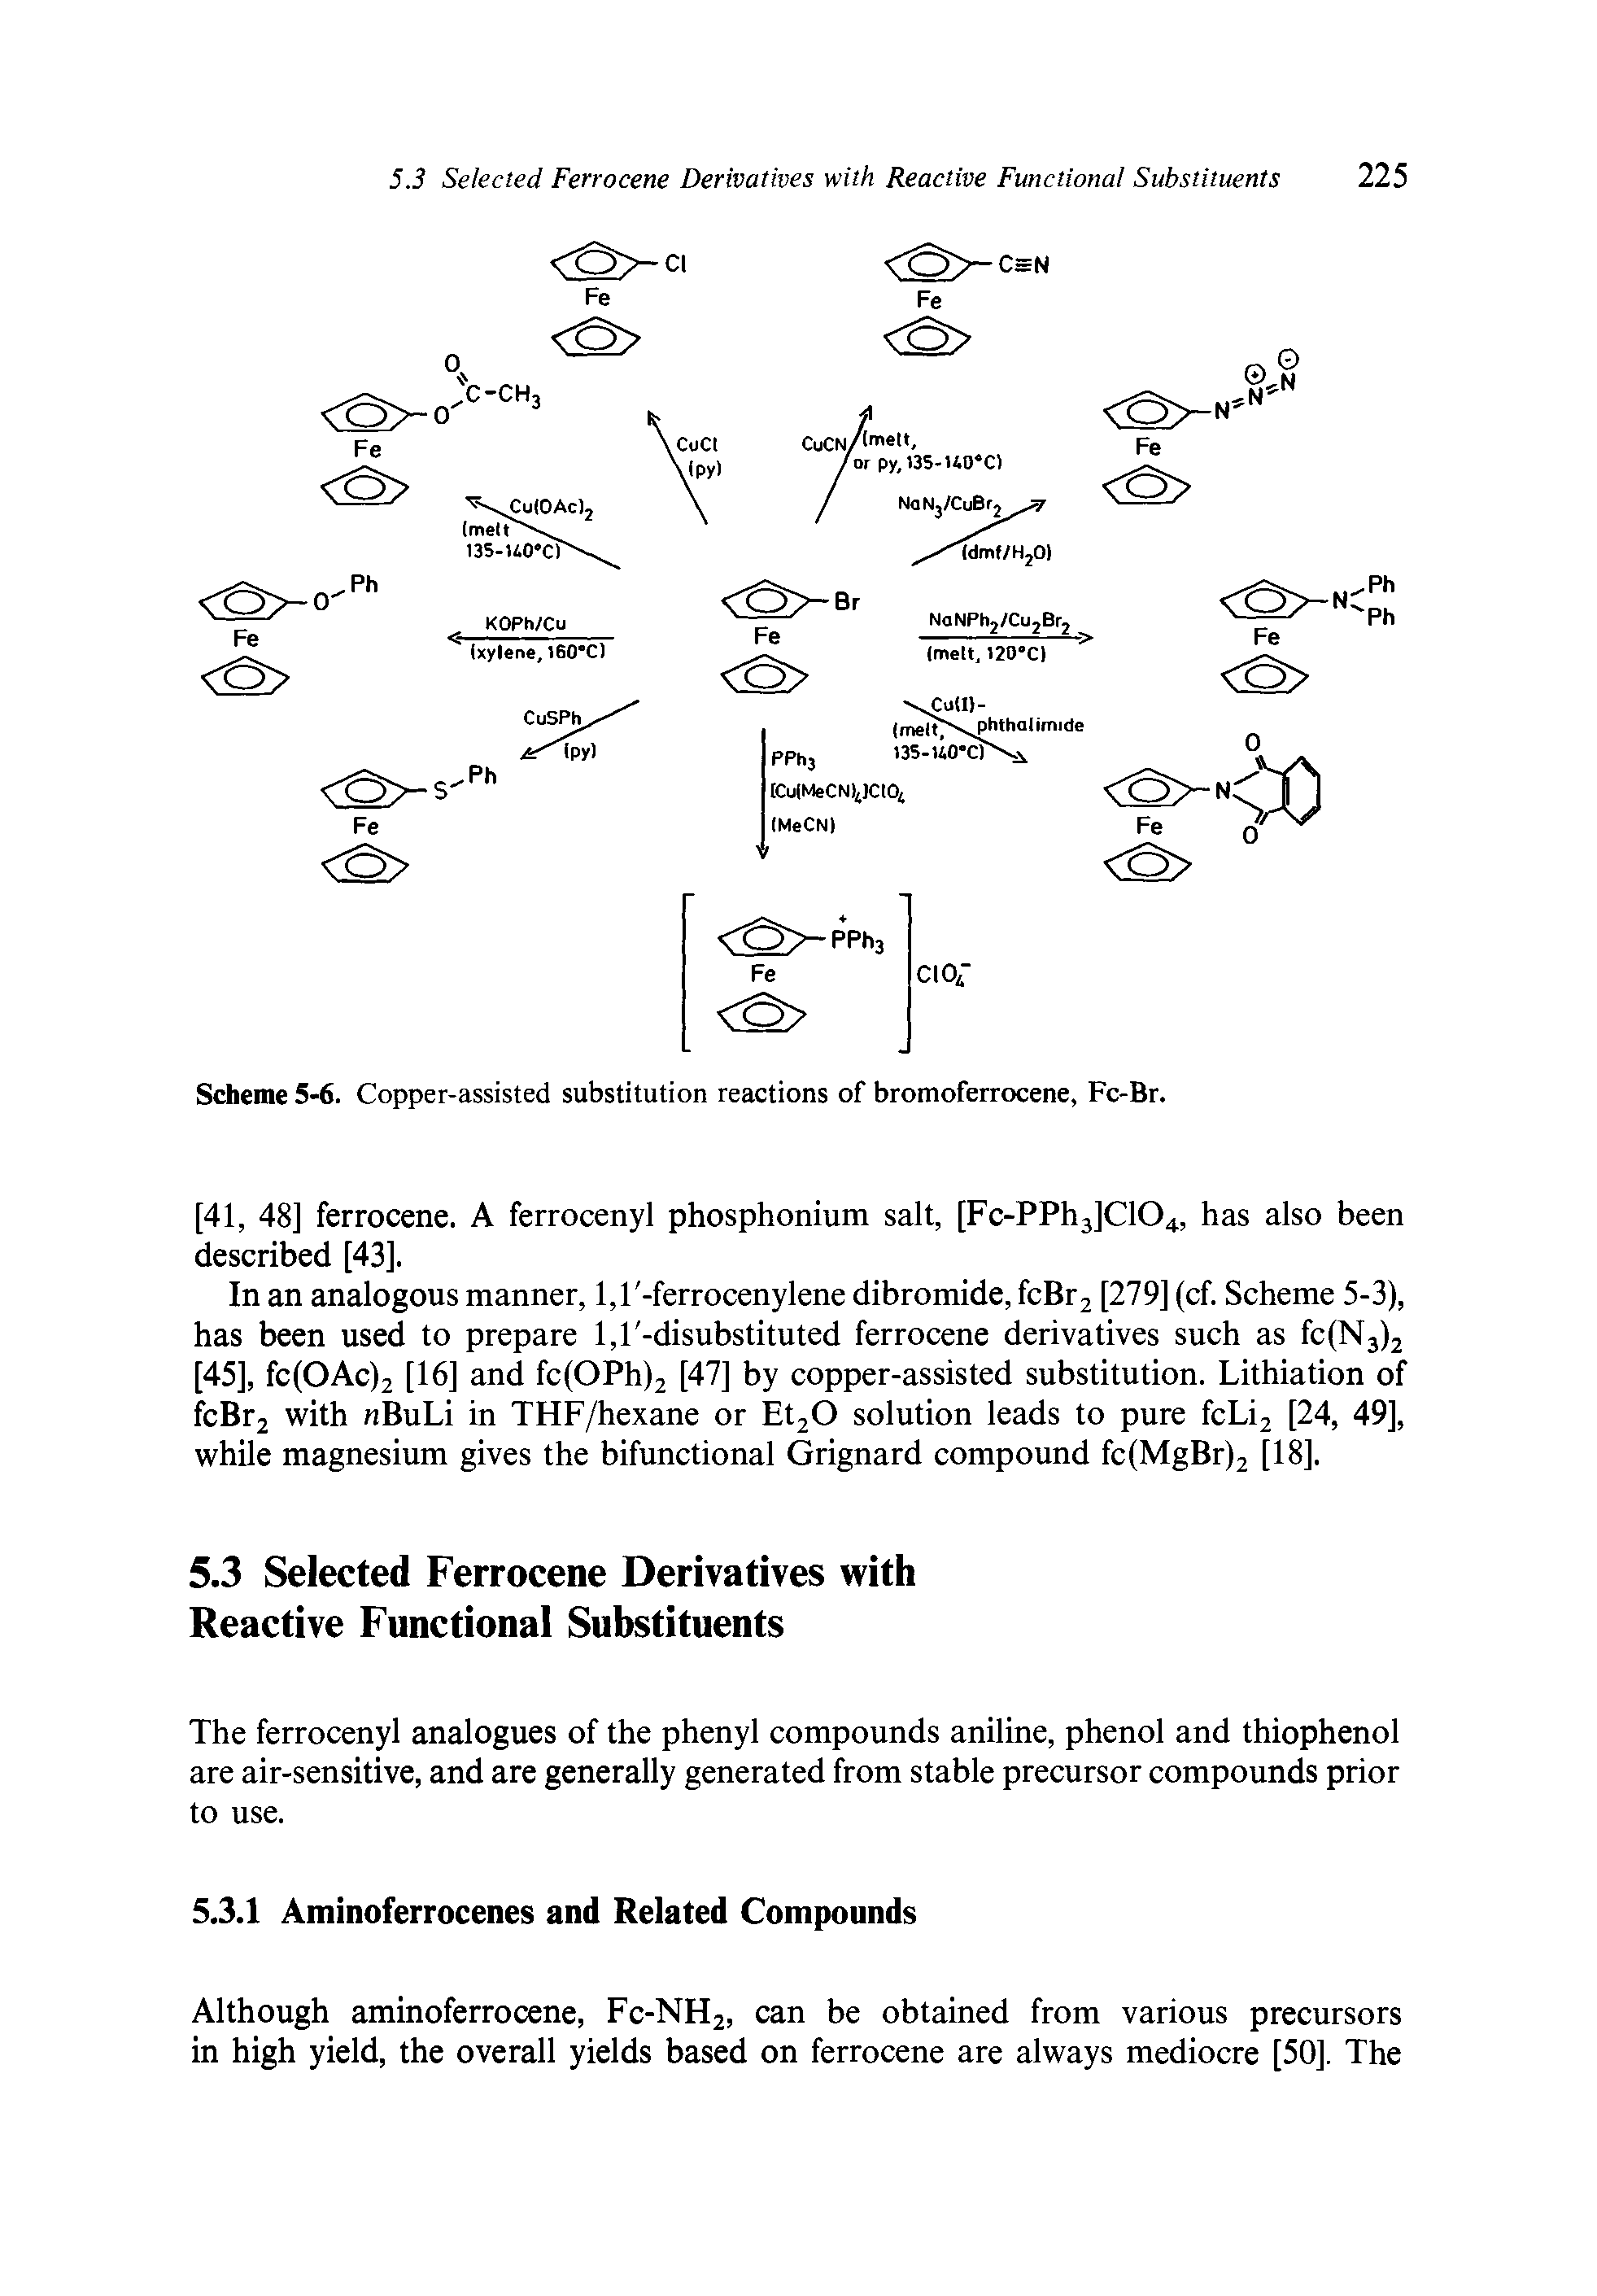 Scheme 5-6. Copper-assisted substitution reactions of bromoferrocene, Fc-Br.